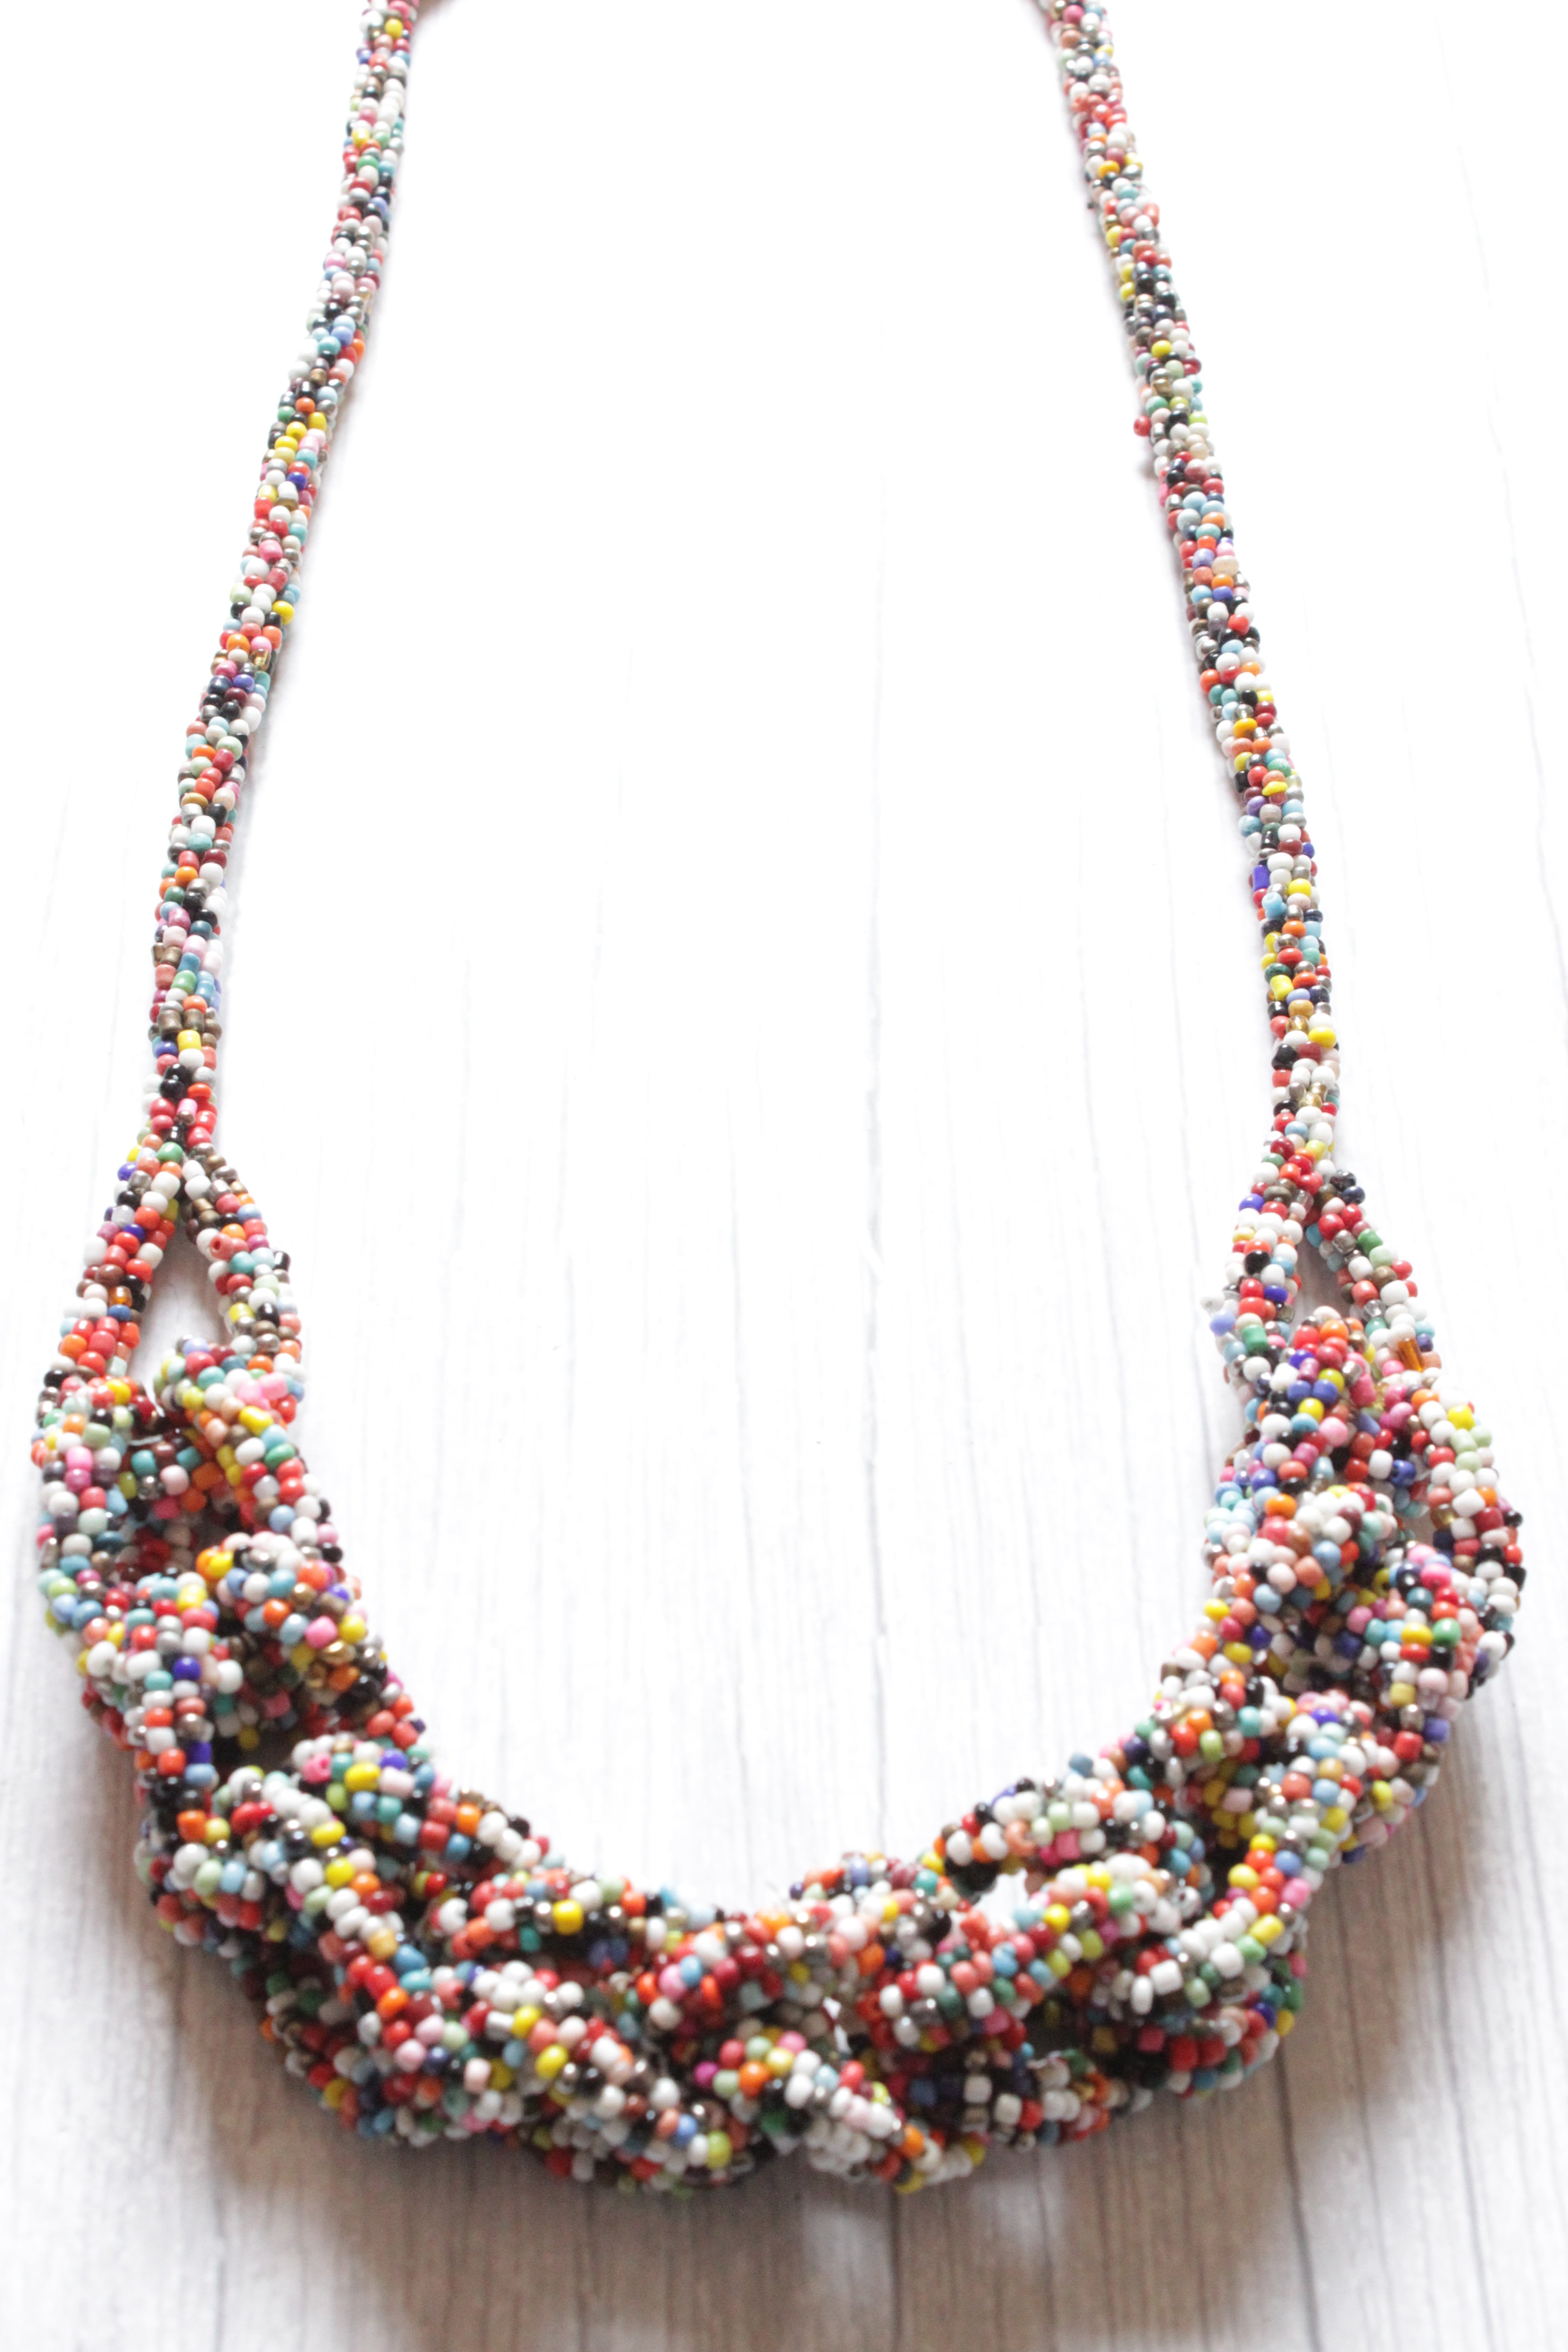 Multi-Color Beaded Hand Braided Long Contemporary Necklace